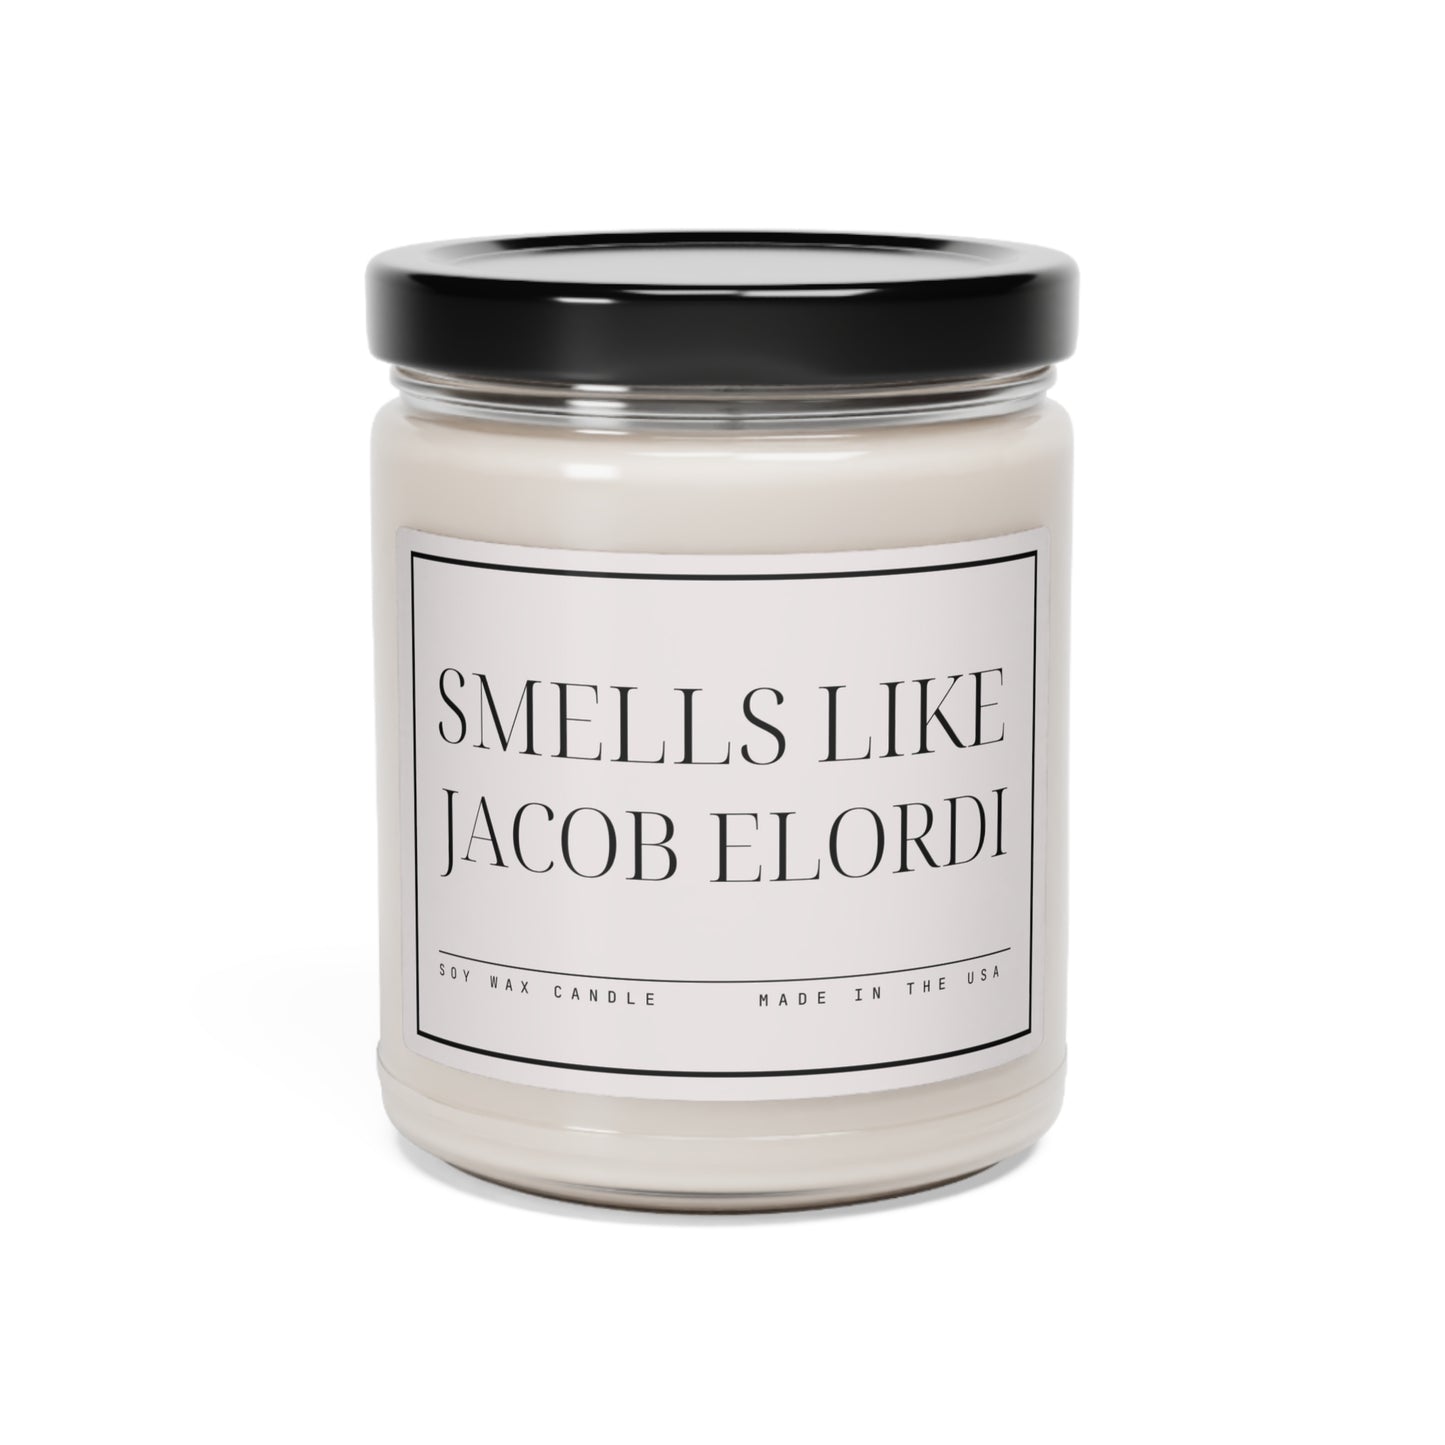 Smells Like Jacob Elordi Candle, Bath Water, Saltburn Candle,  Funny Candle, Celebrity Candle, Scented Soy Candle, Gift for Sister